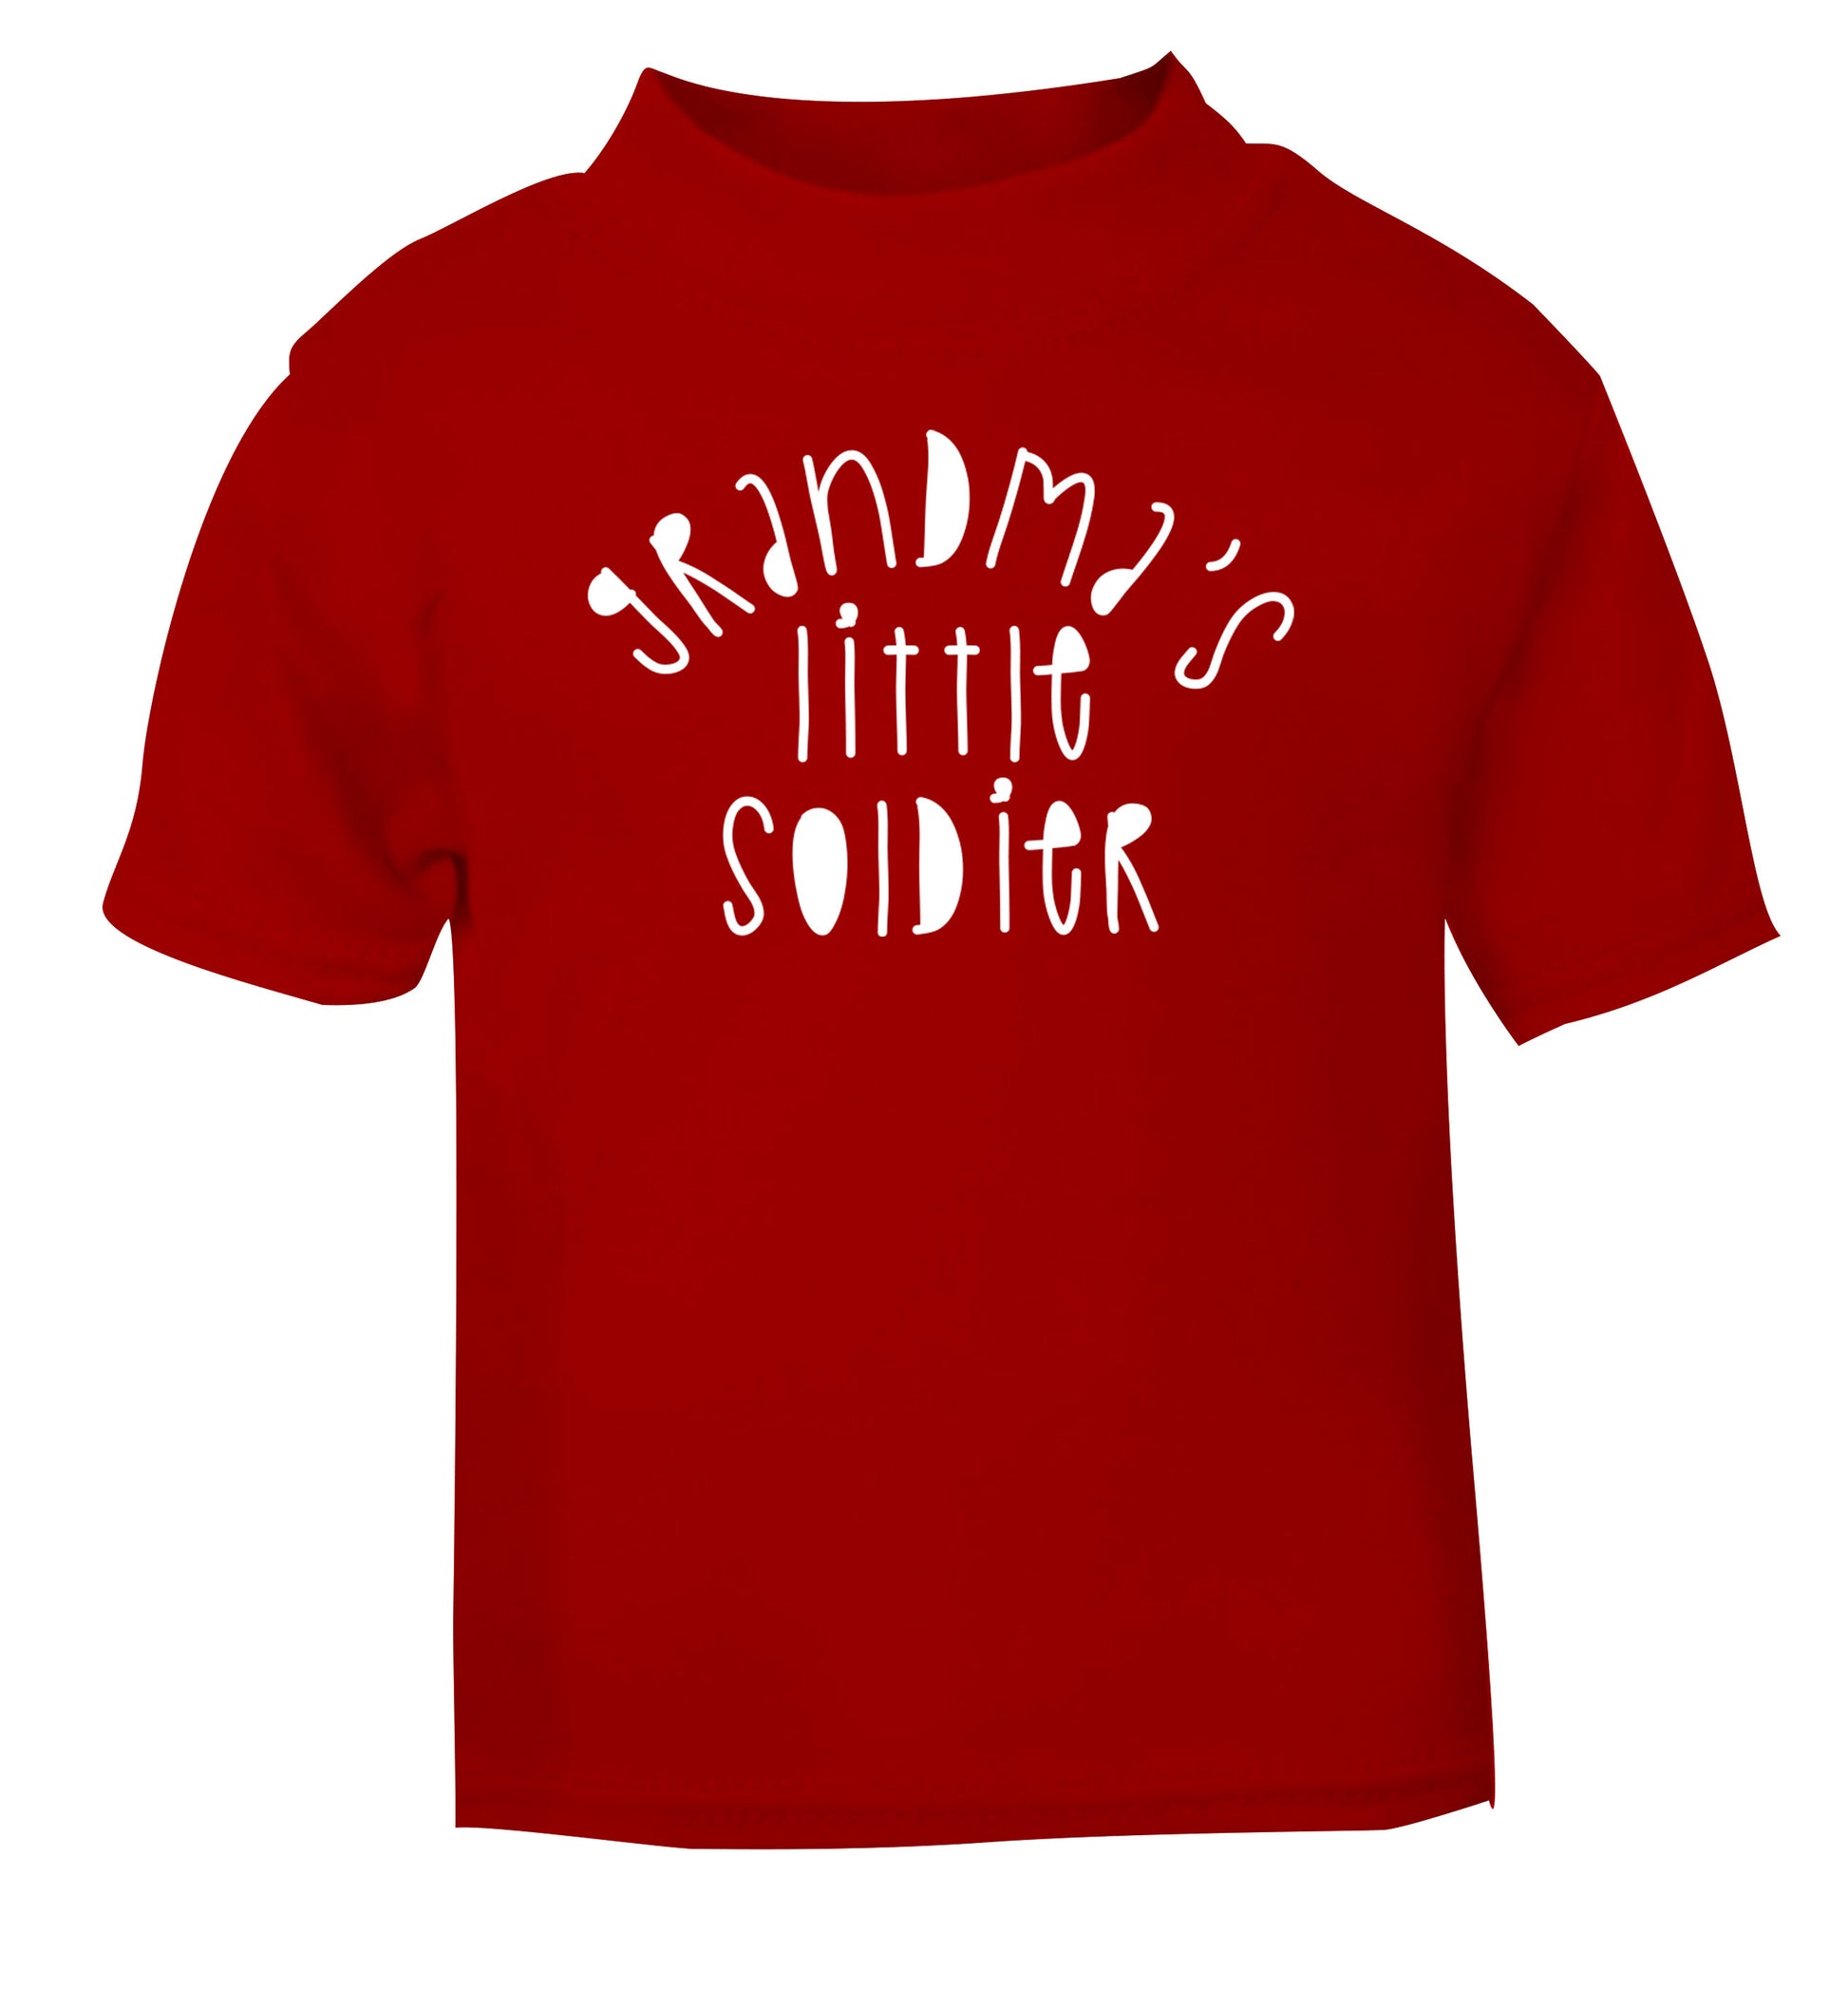 Grandma's little soldier red Baby Toddler Tshirt 2 Years